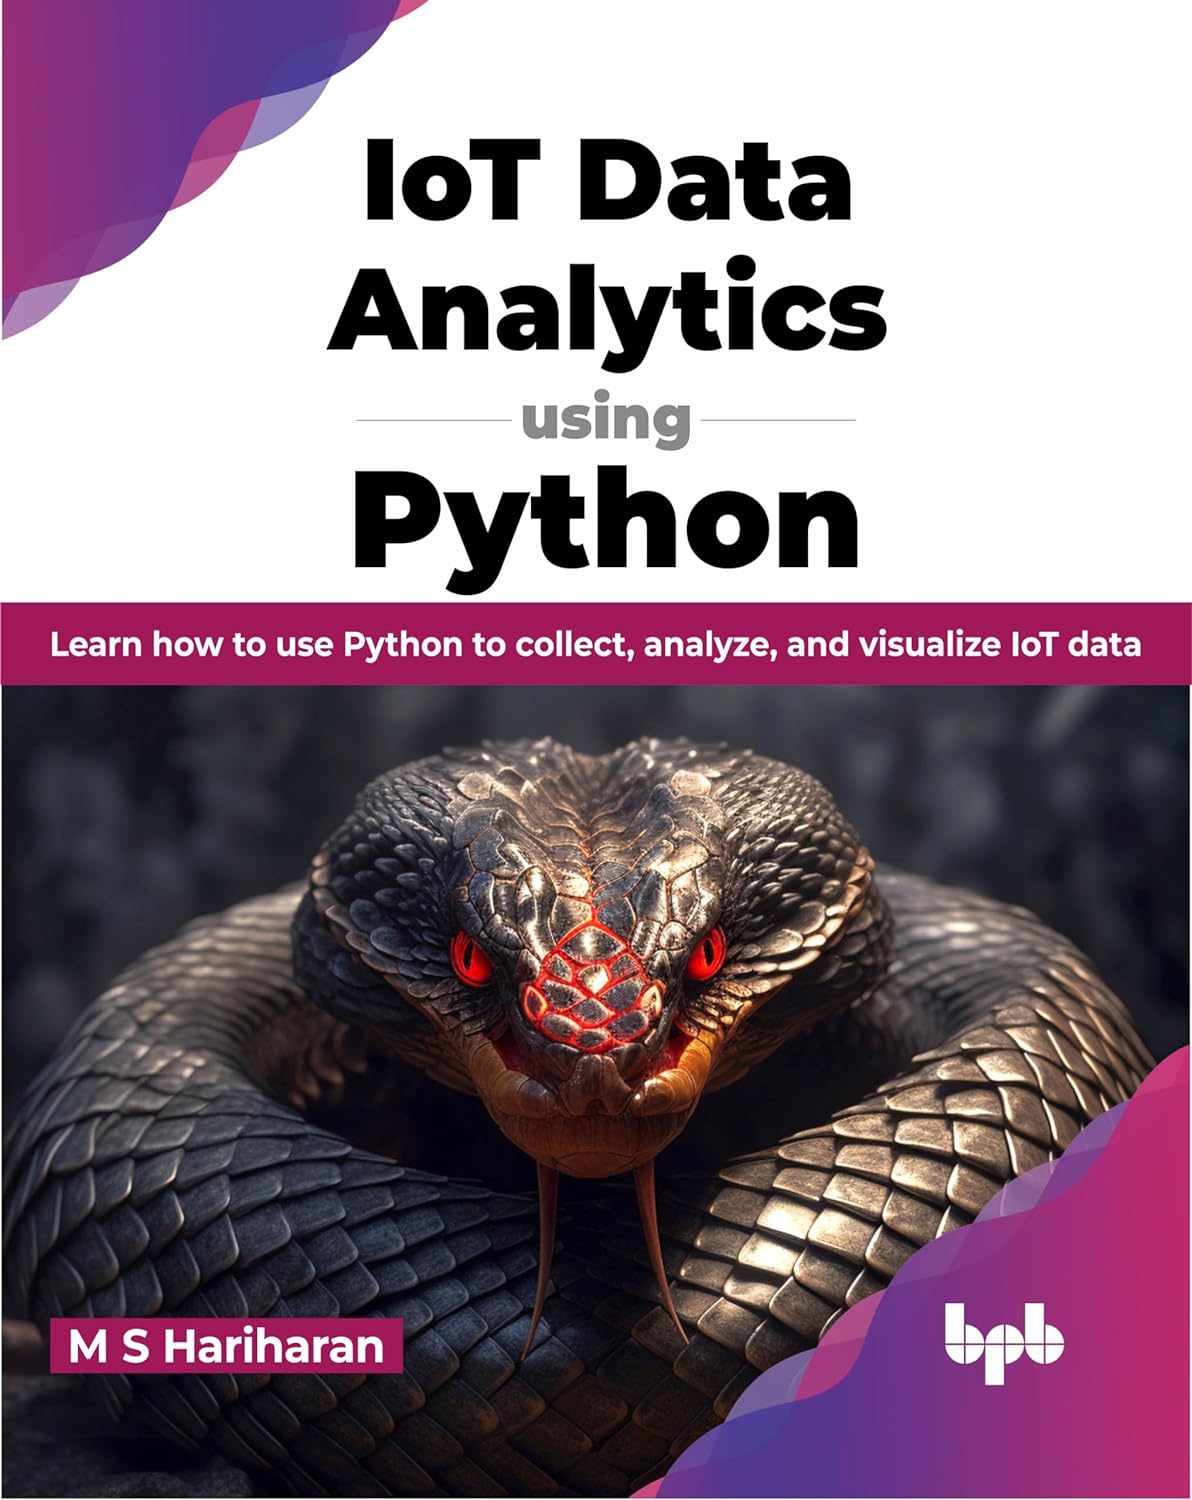 (EBook PDF)IoT Data Analytics using Python: Learn how to use Python to collect, analyze, and visualize IoT data by M S Hariharan